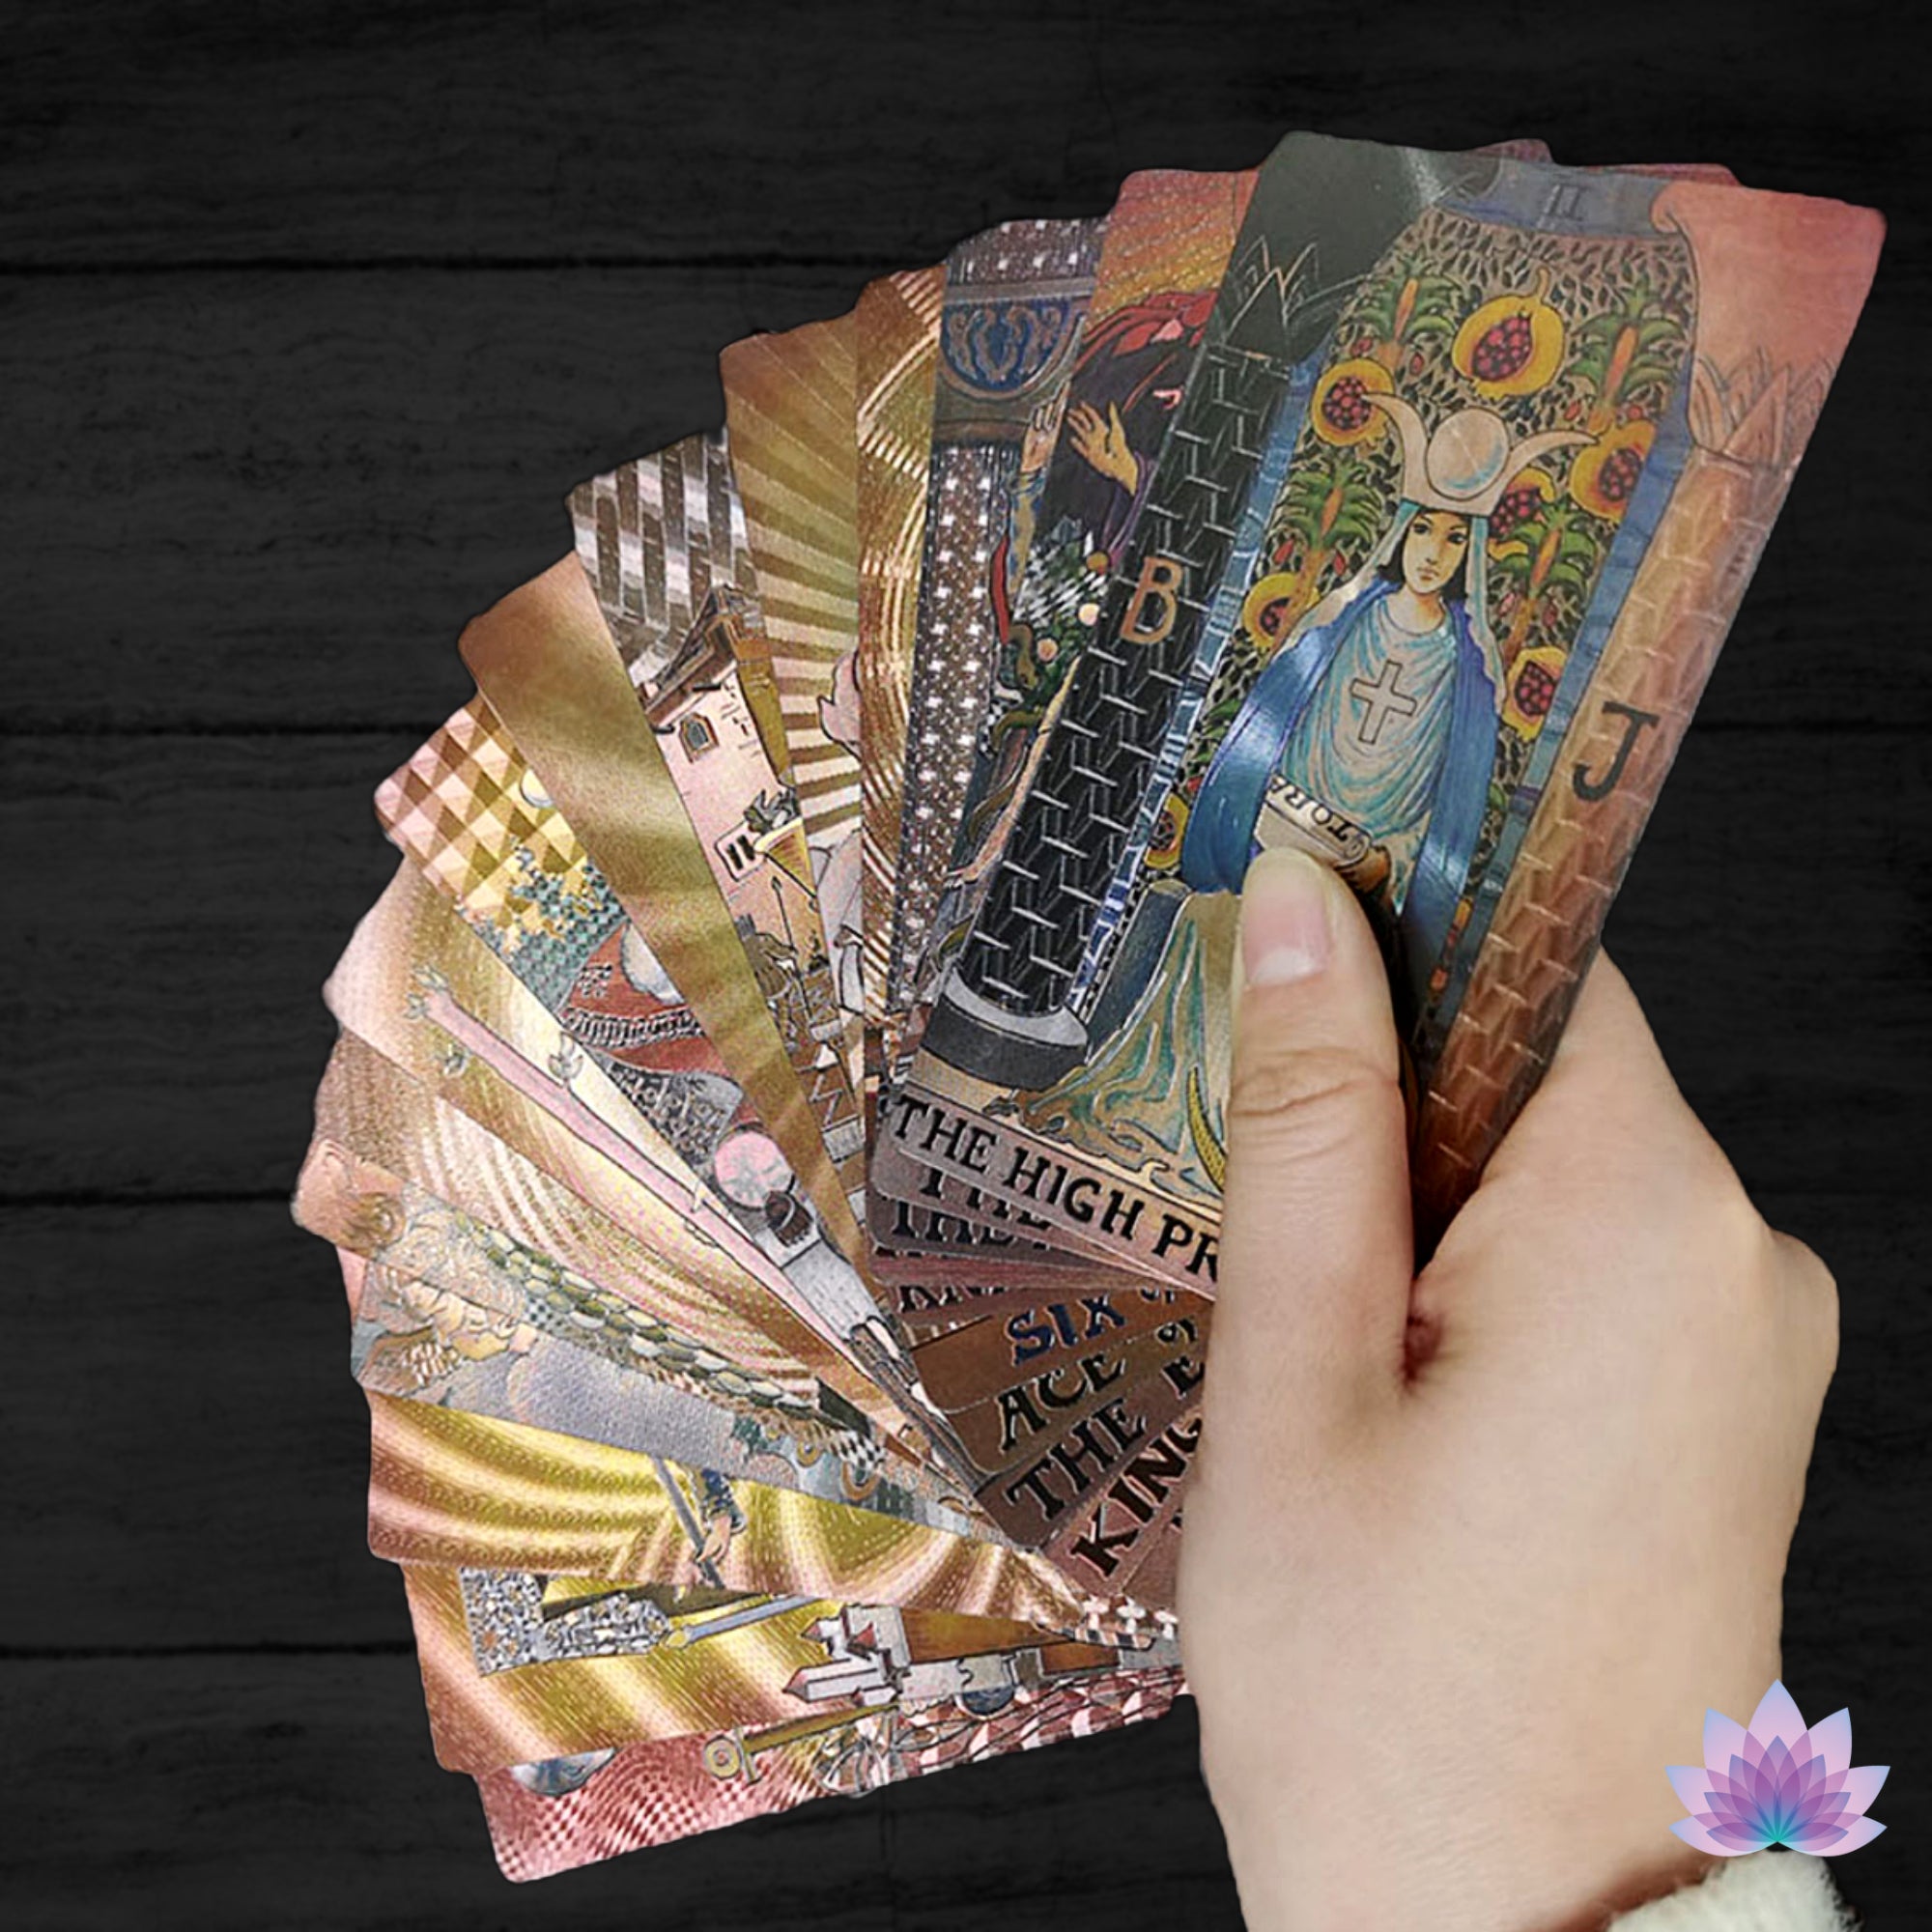 Gold Foil Tarot Deck | Luxury PVC Waterproof Wear-Resistant Tarot Cards In Antique Faded Golden Style | Premium Divination Gift Box + English Guidebook | Apollo Tarot Shop